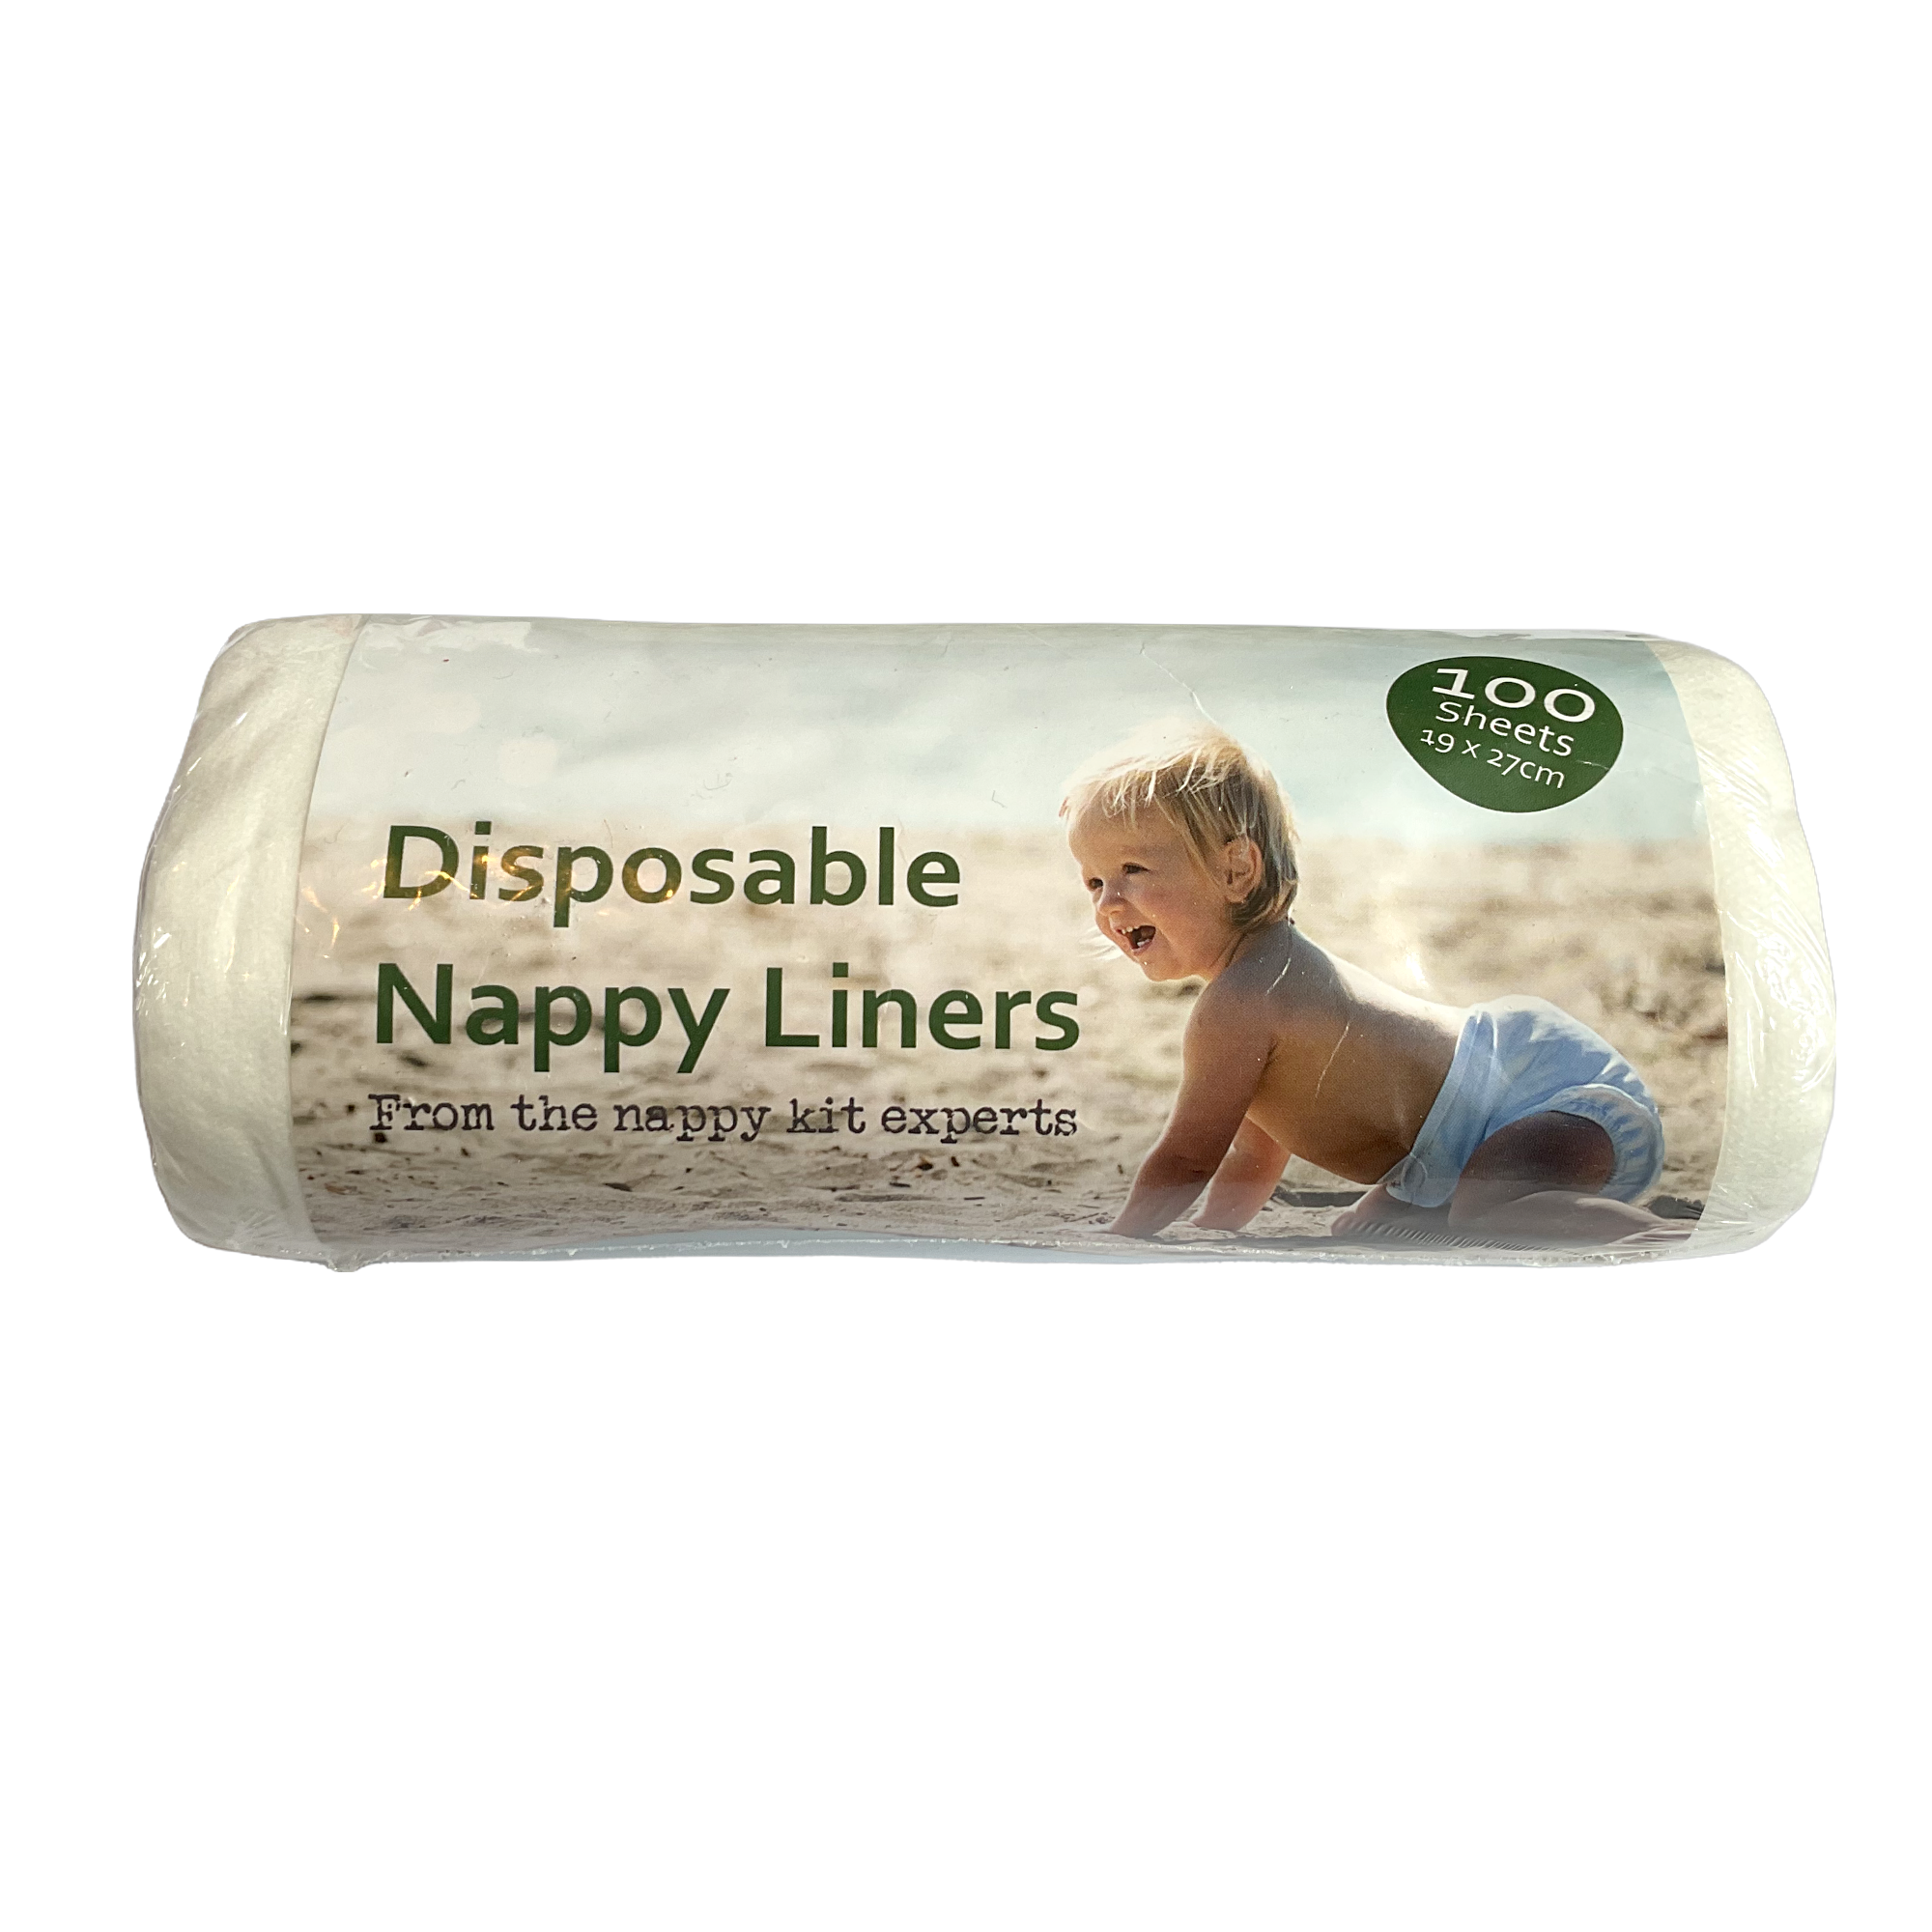 Disposable nappy liners